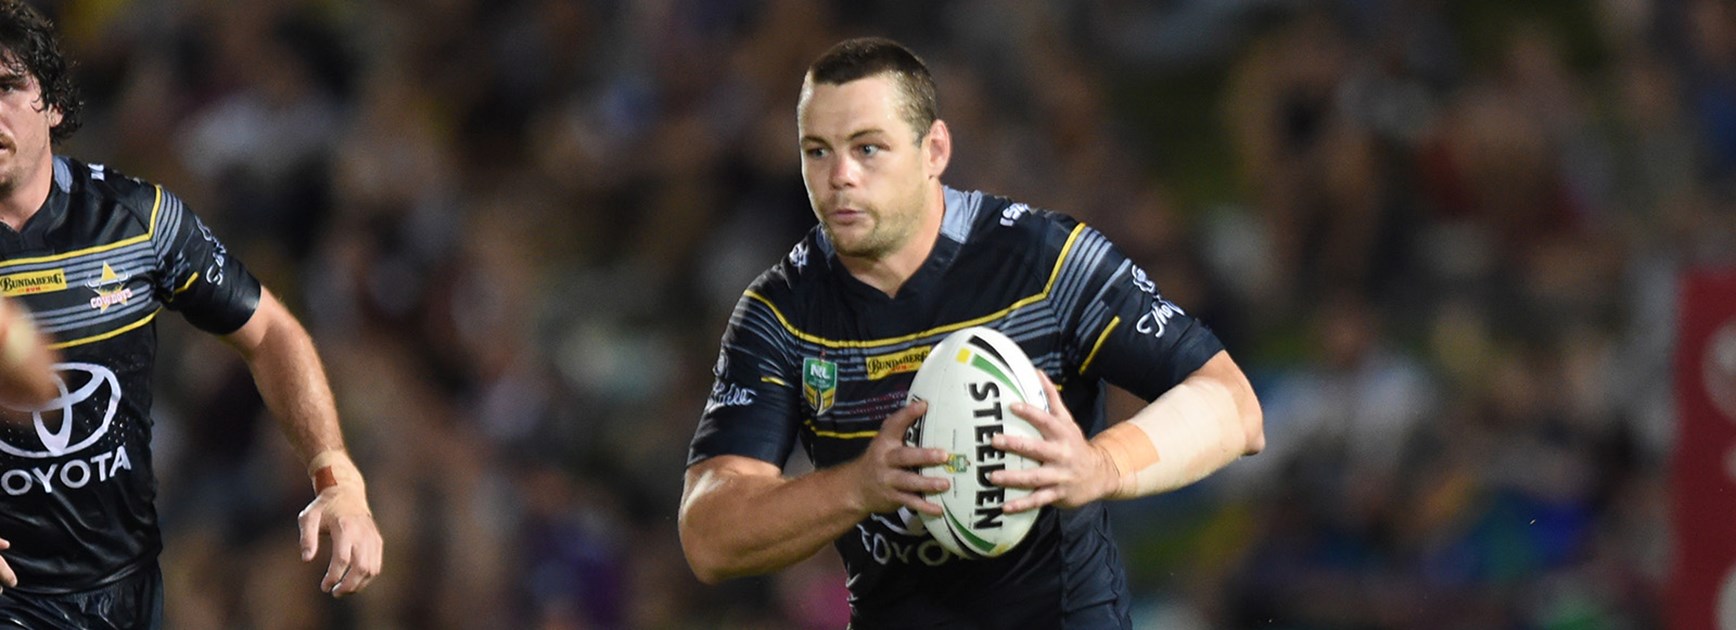 Shaun Fensom made his Cowboys debut against Manly in Round 3.